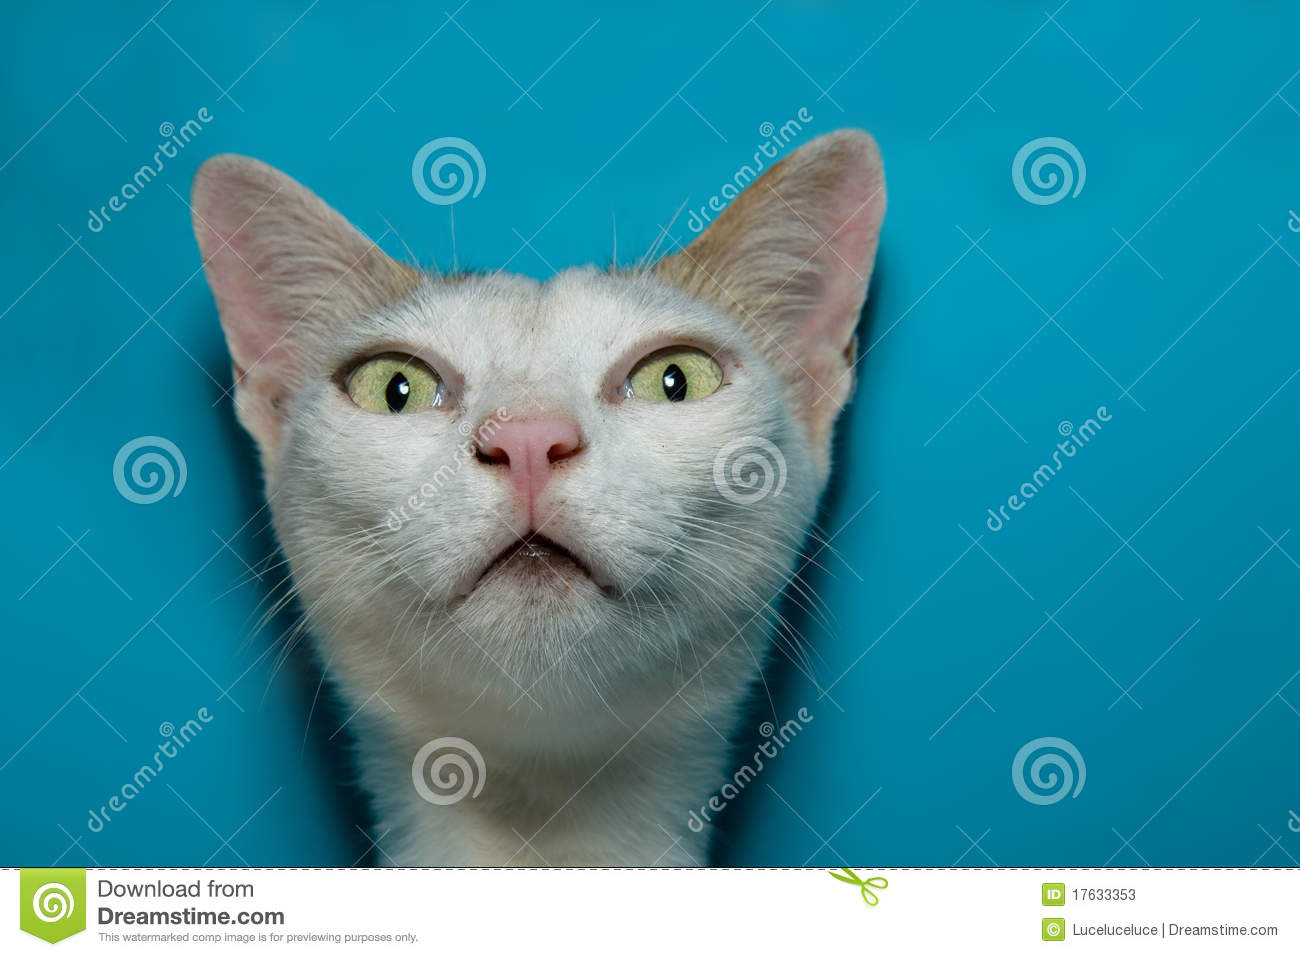 Sour Puss On Blue Background With Text Space